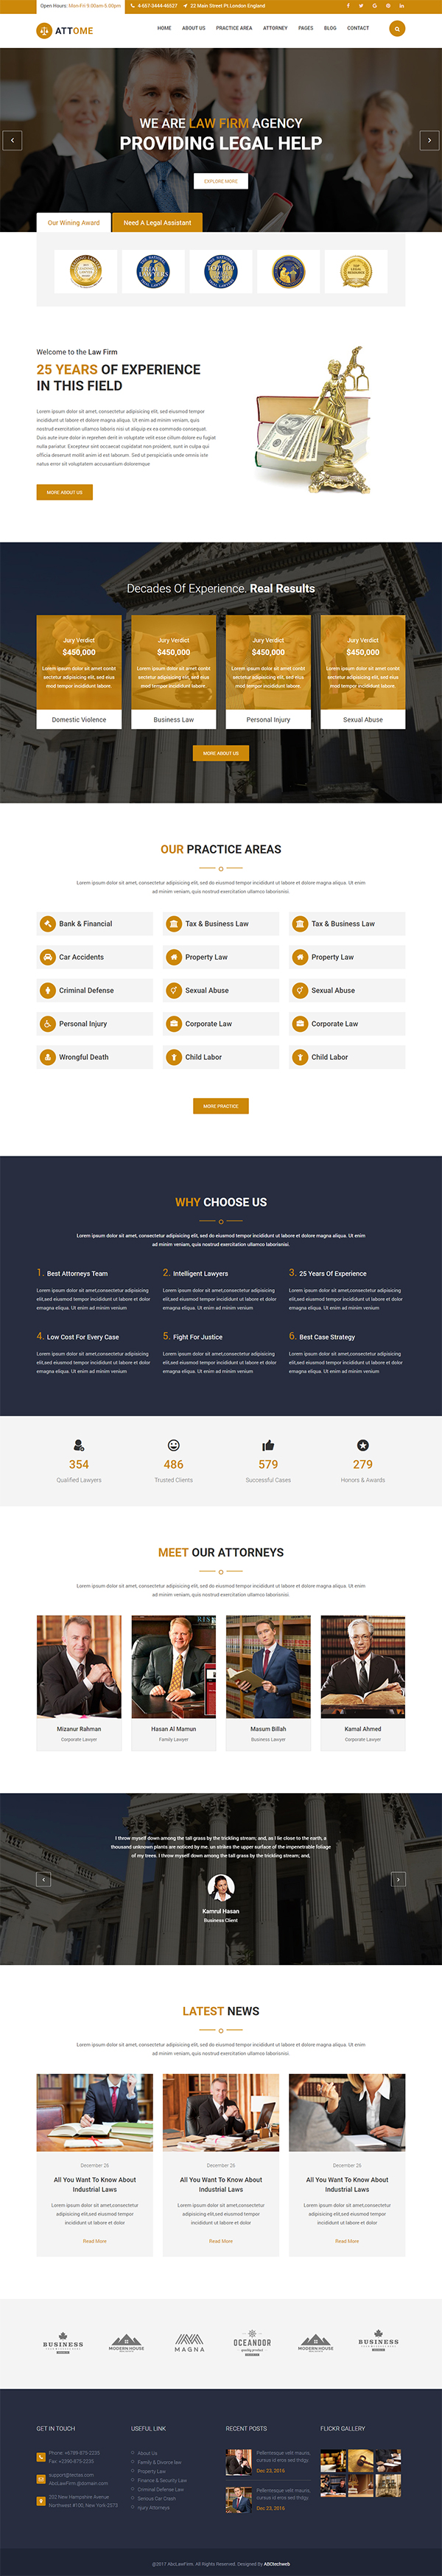 Attome | Responsive WordPress theme for lawyers and attorneys